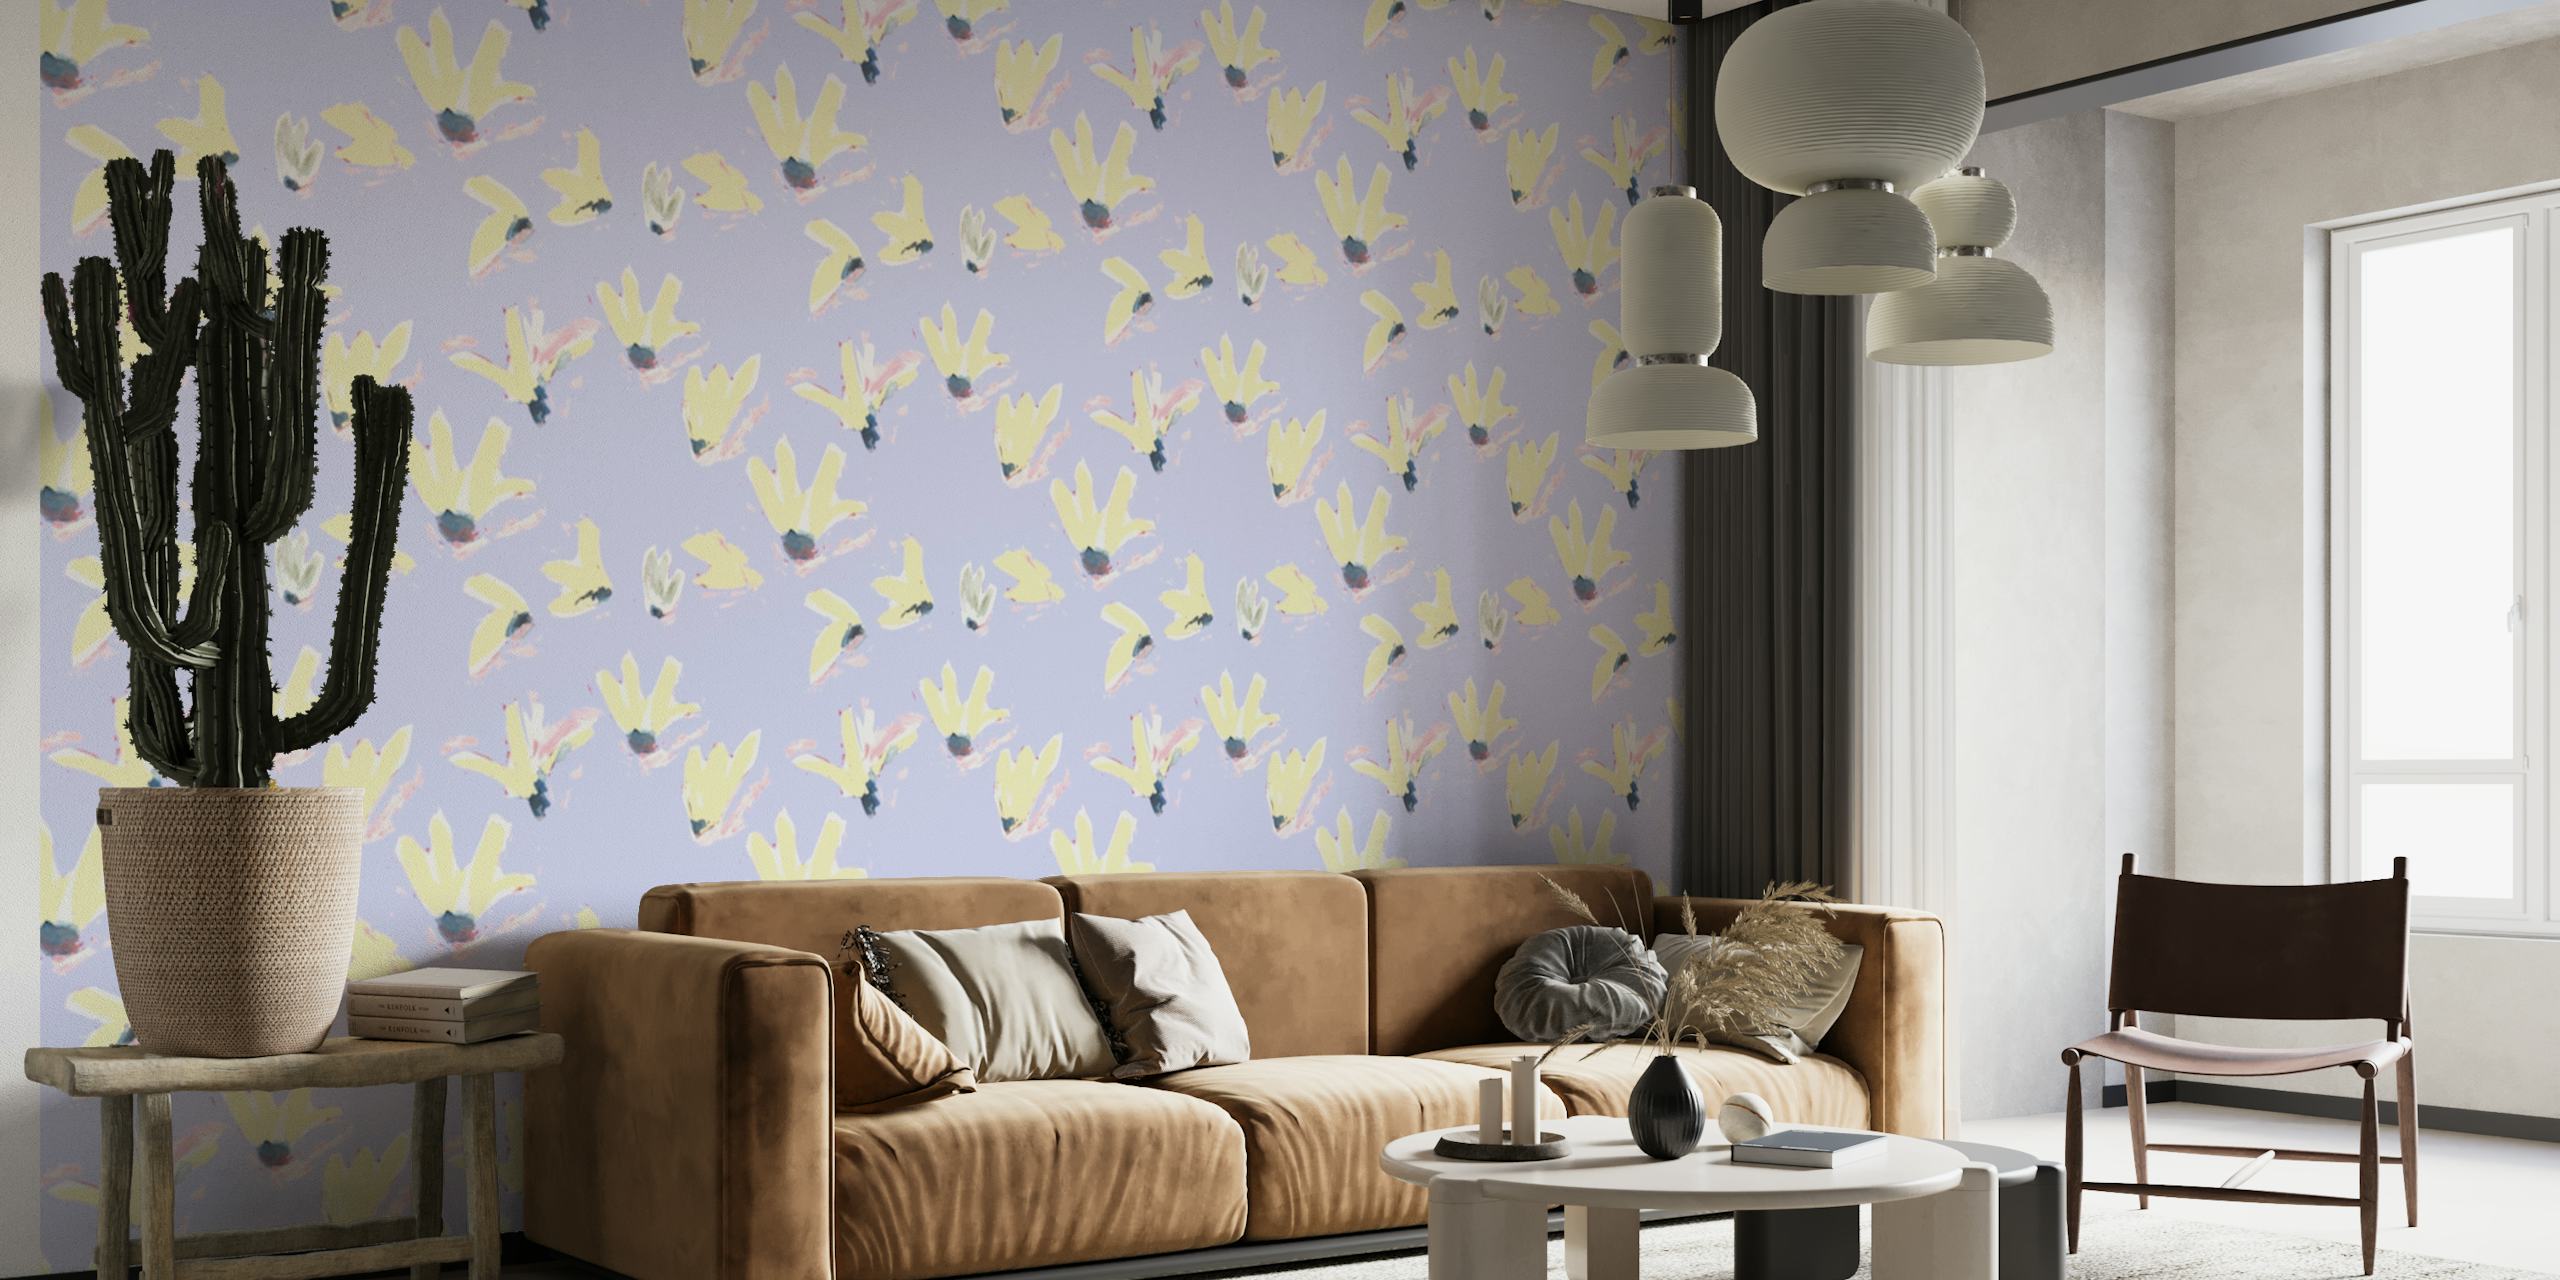 Lavender floral wall mural with blooming yellow and white flowers pattern